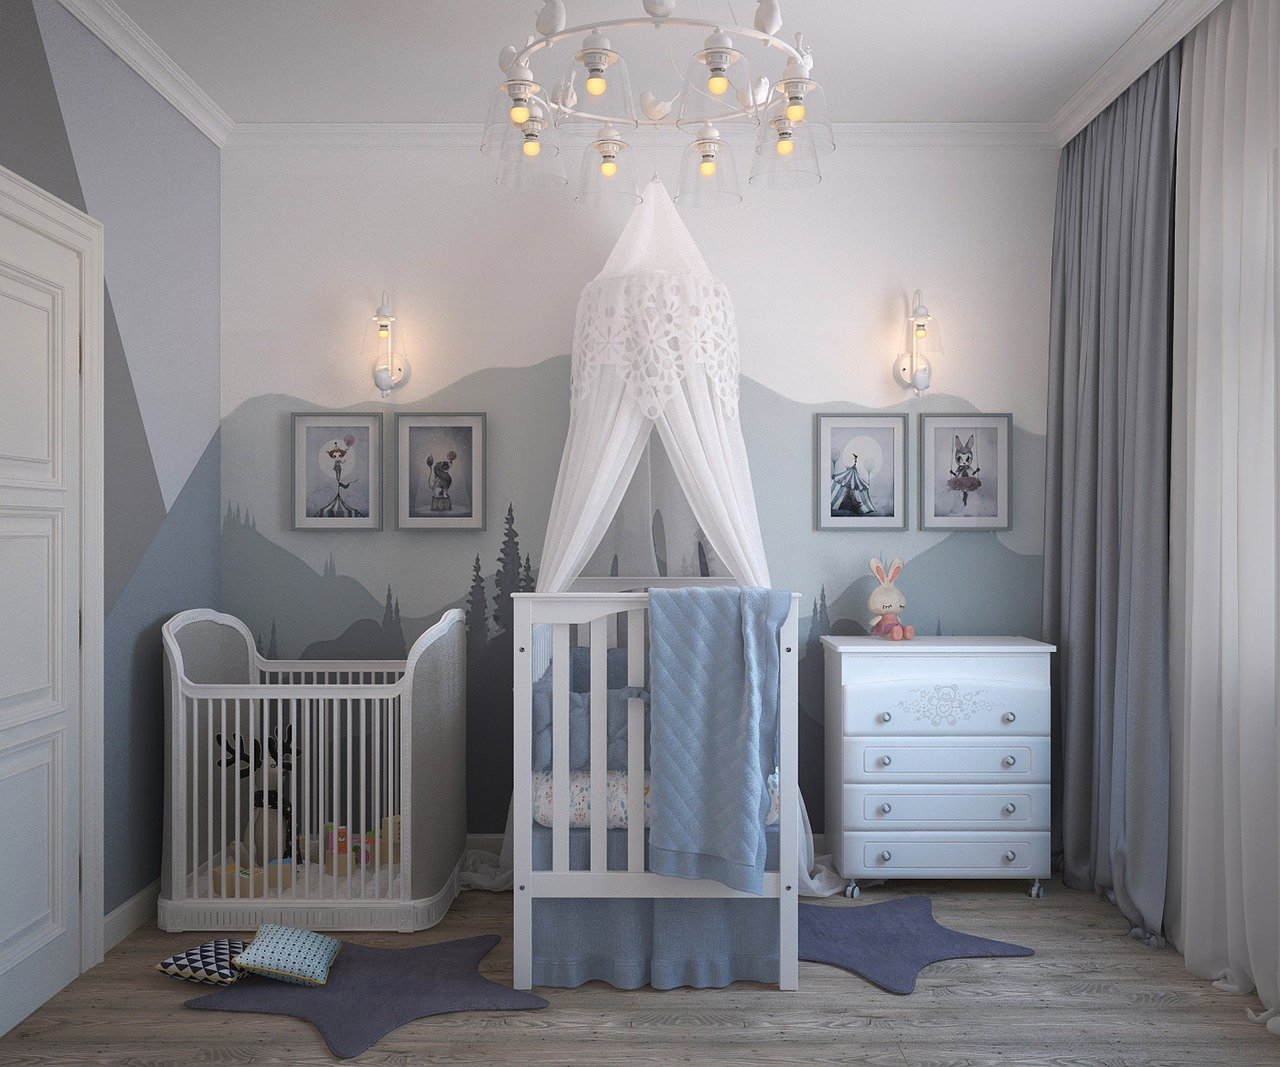 Ready-made children’s room design – is it worth it?